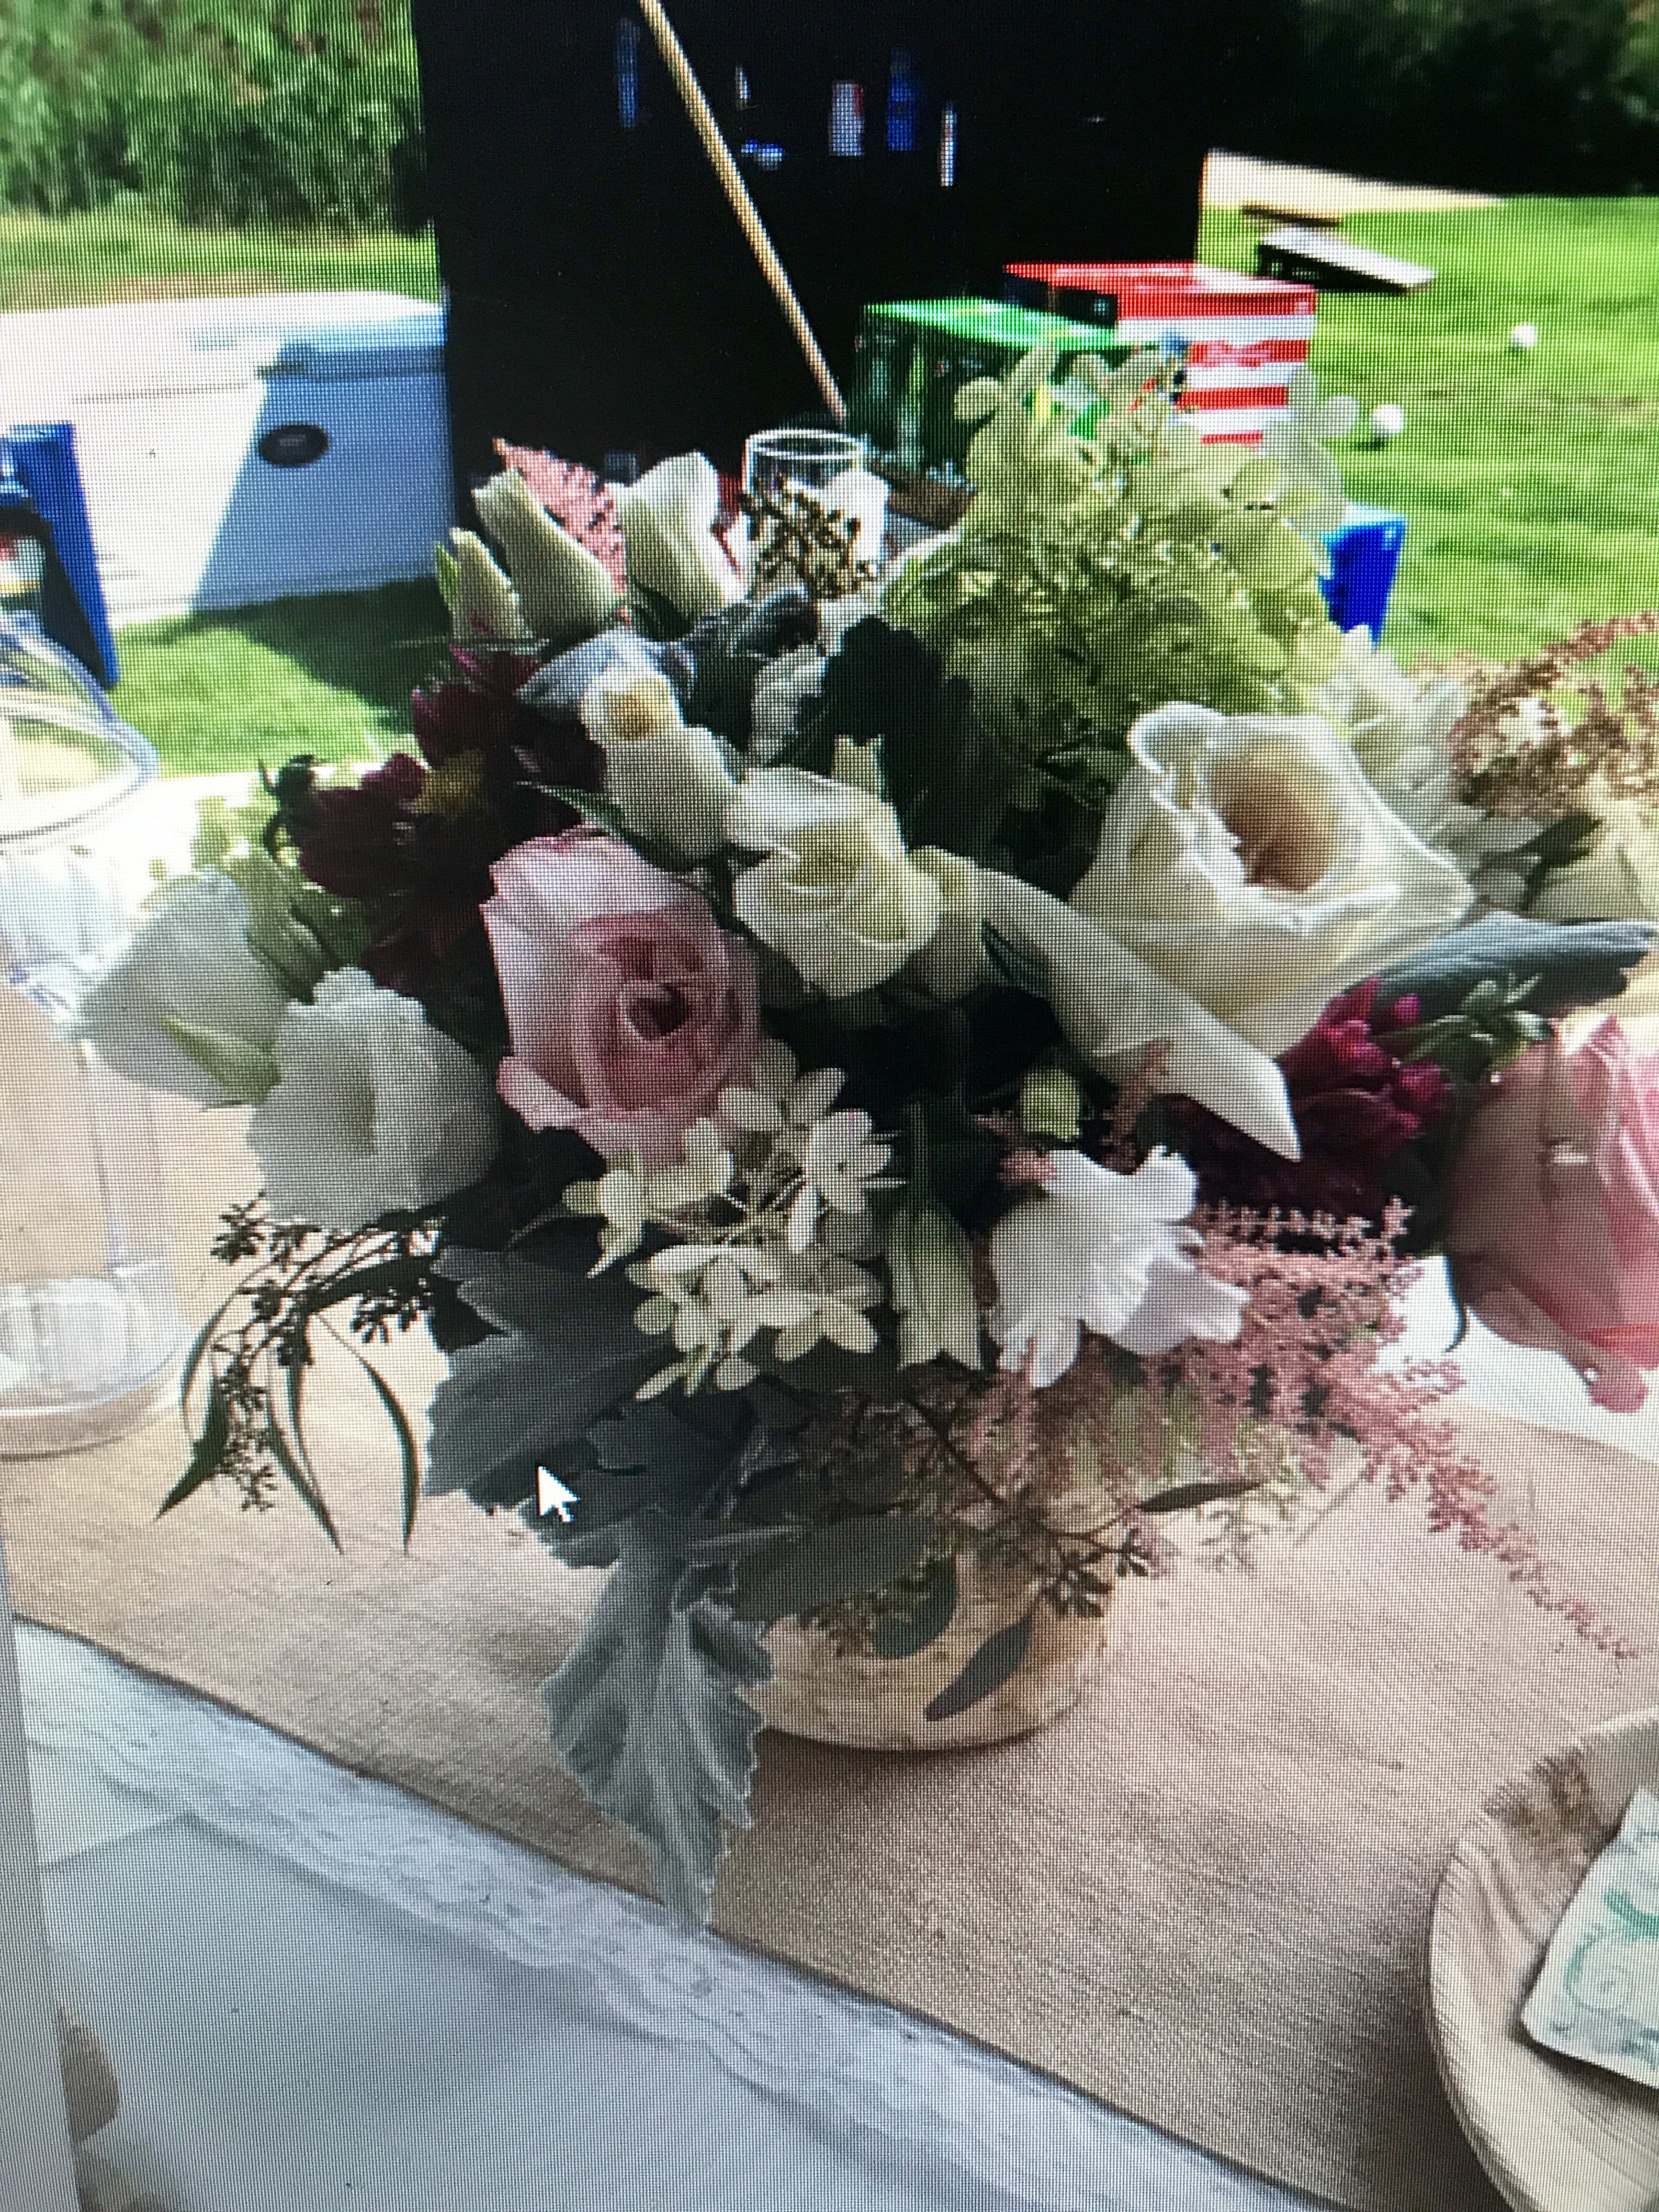 Hydrangeas Roses And Mixed Garden Greenery In Riverhead Ny L A Country Flowers,Tabouli Salad Recipe